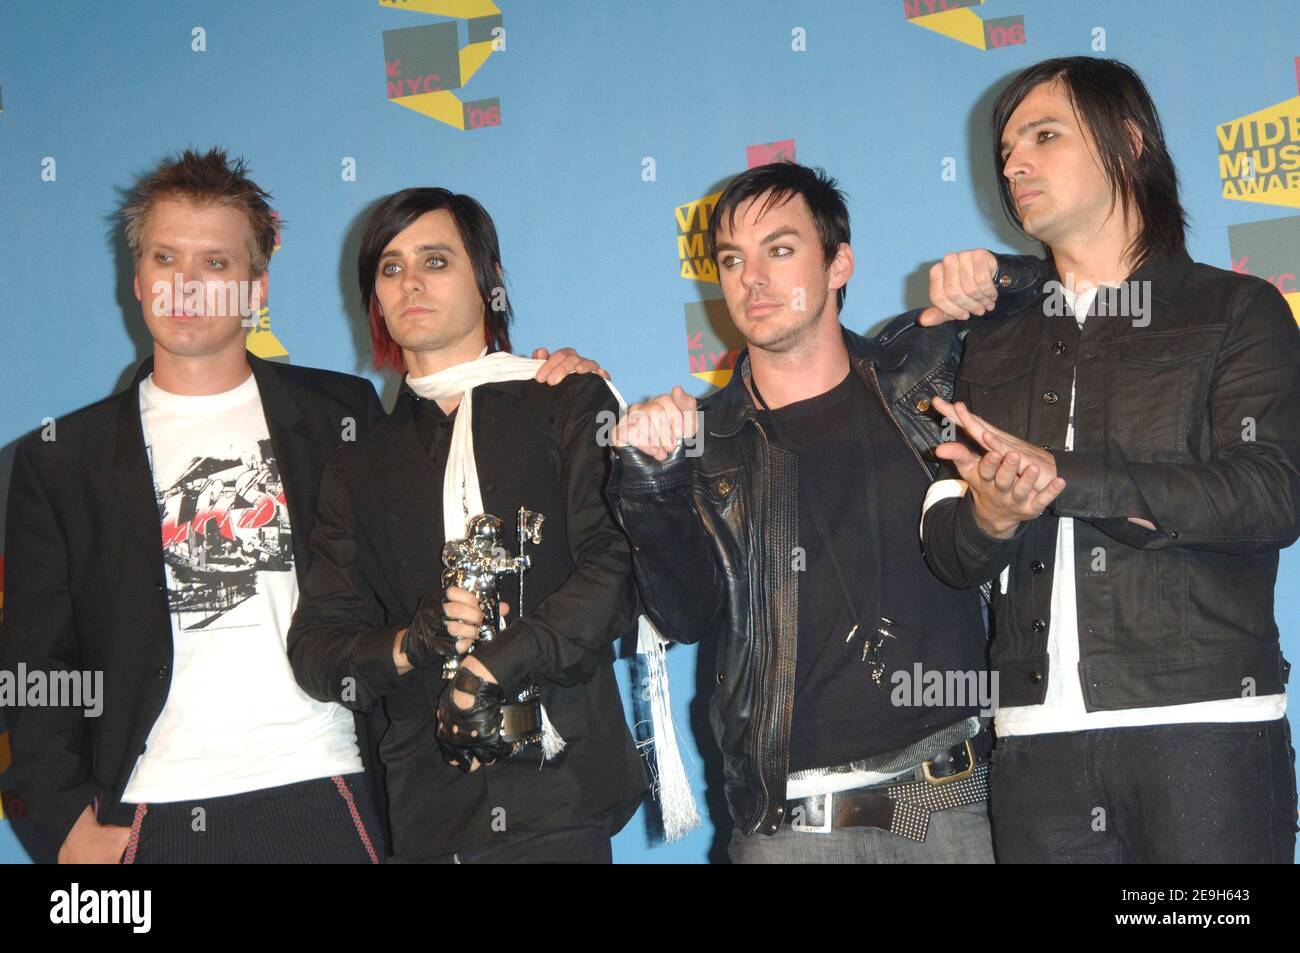 L-R) Musicians Matt Wachter, Jared Leto, Shannon Leto, and Tomo Milicivitch  pose with their MTV2 award in the press room during the 2006 MTV Video  Music Awards held at the Radio City